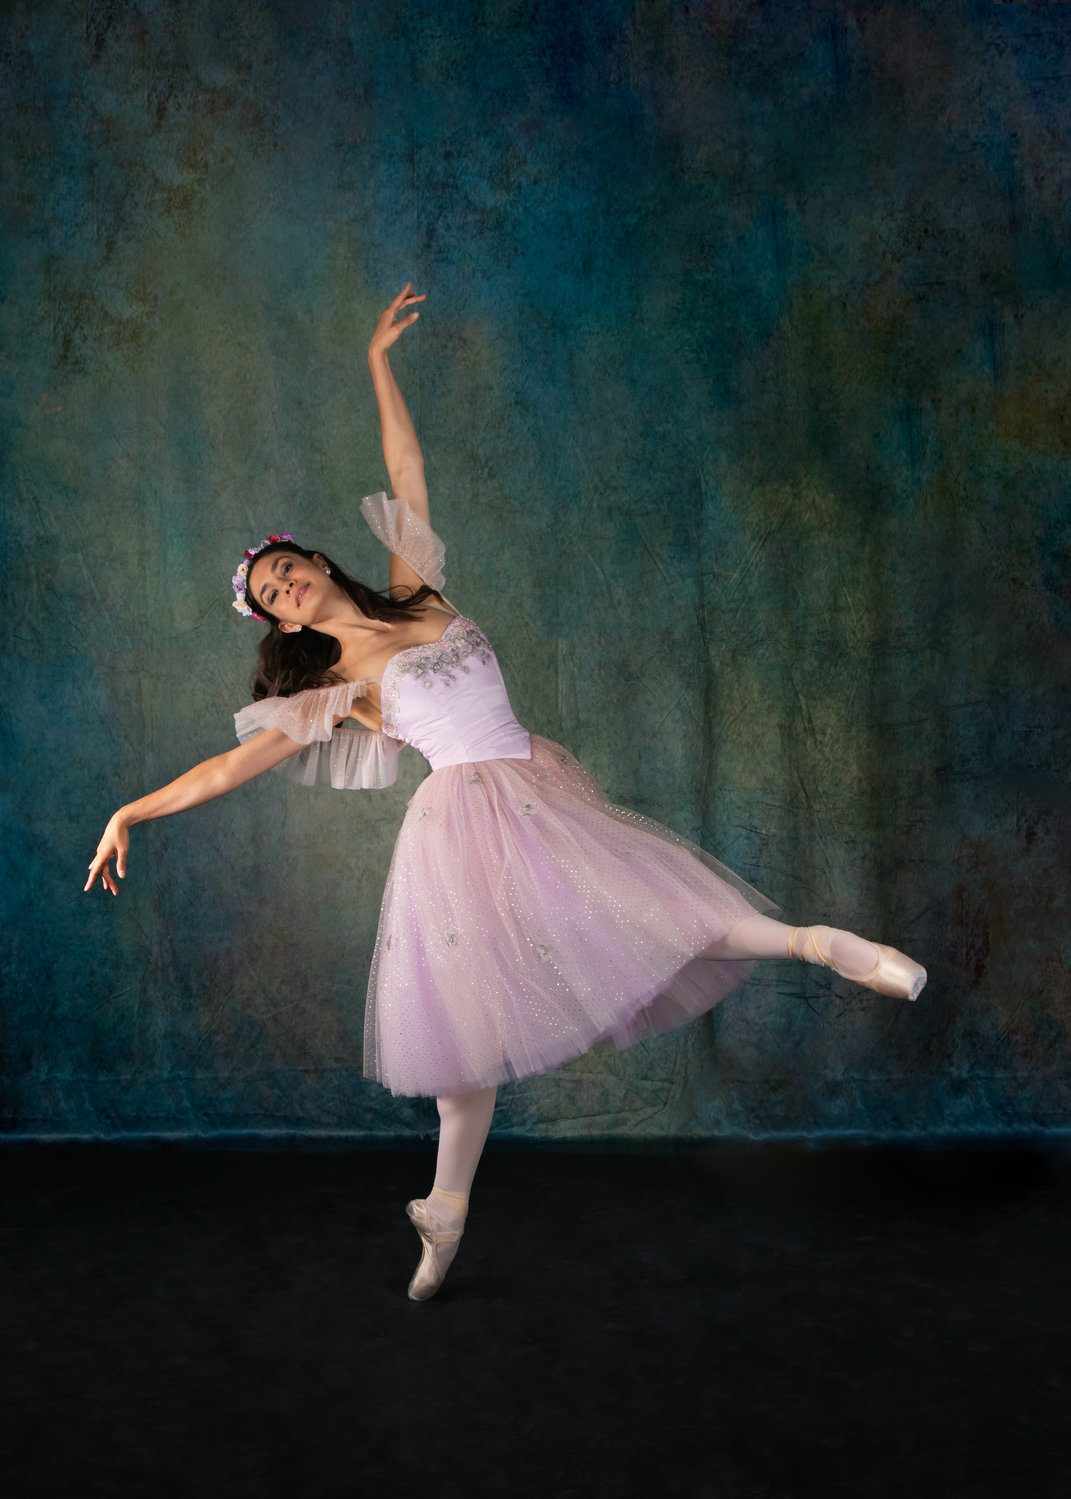 The Florida Ballet programs feature highly trained dancers.